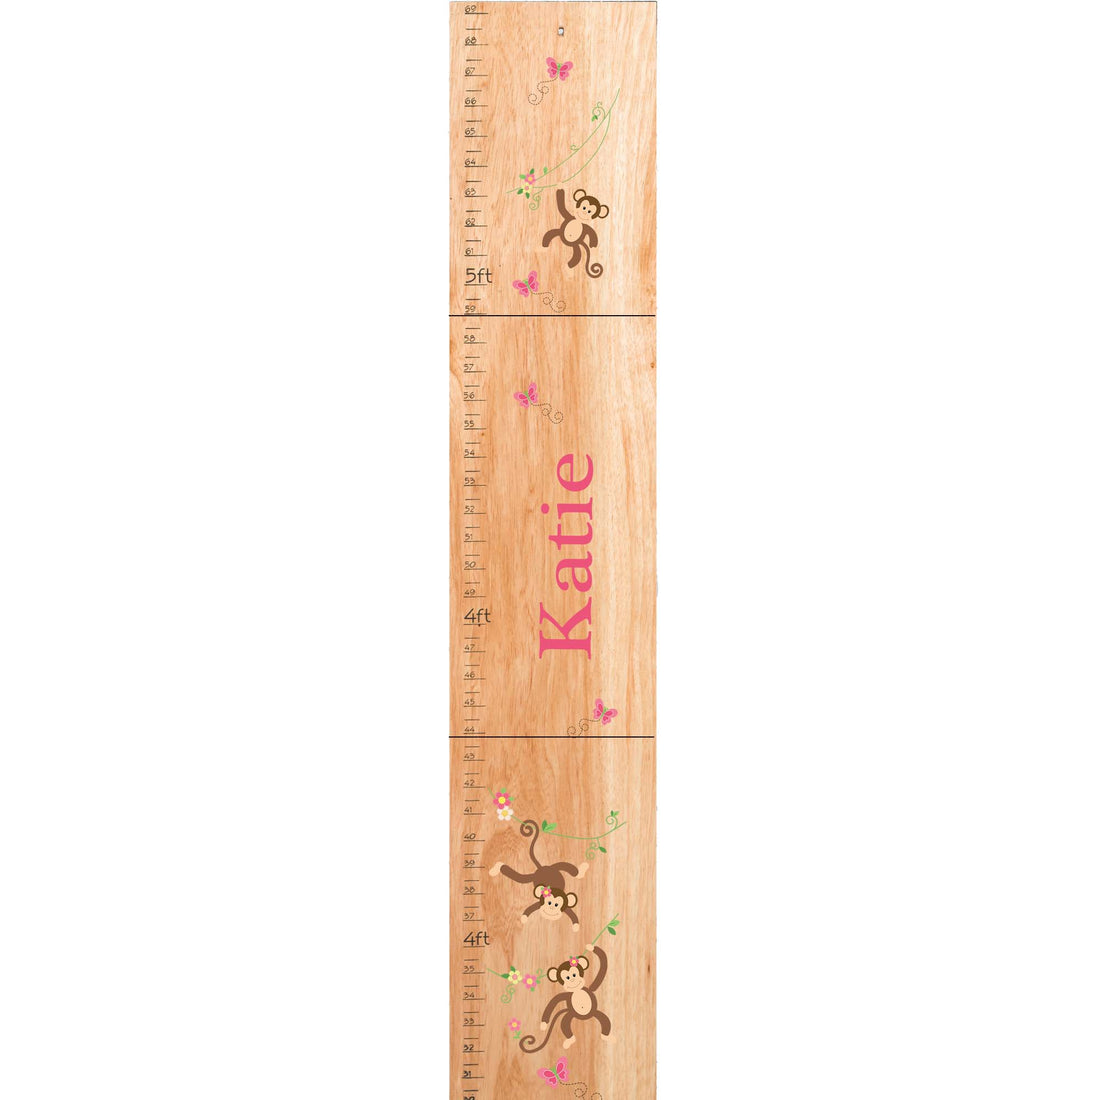 Personalized Natural Growth Chart With Monkey Girl Design